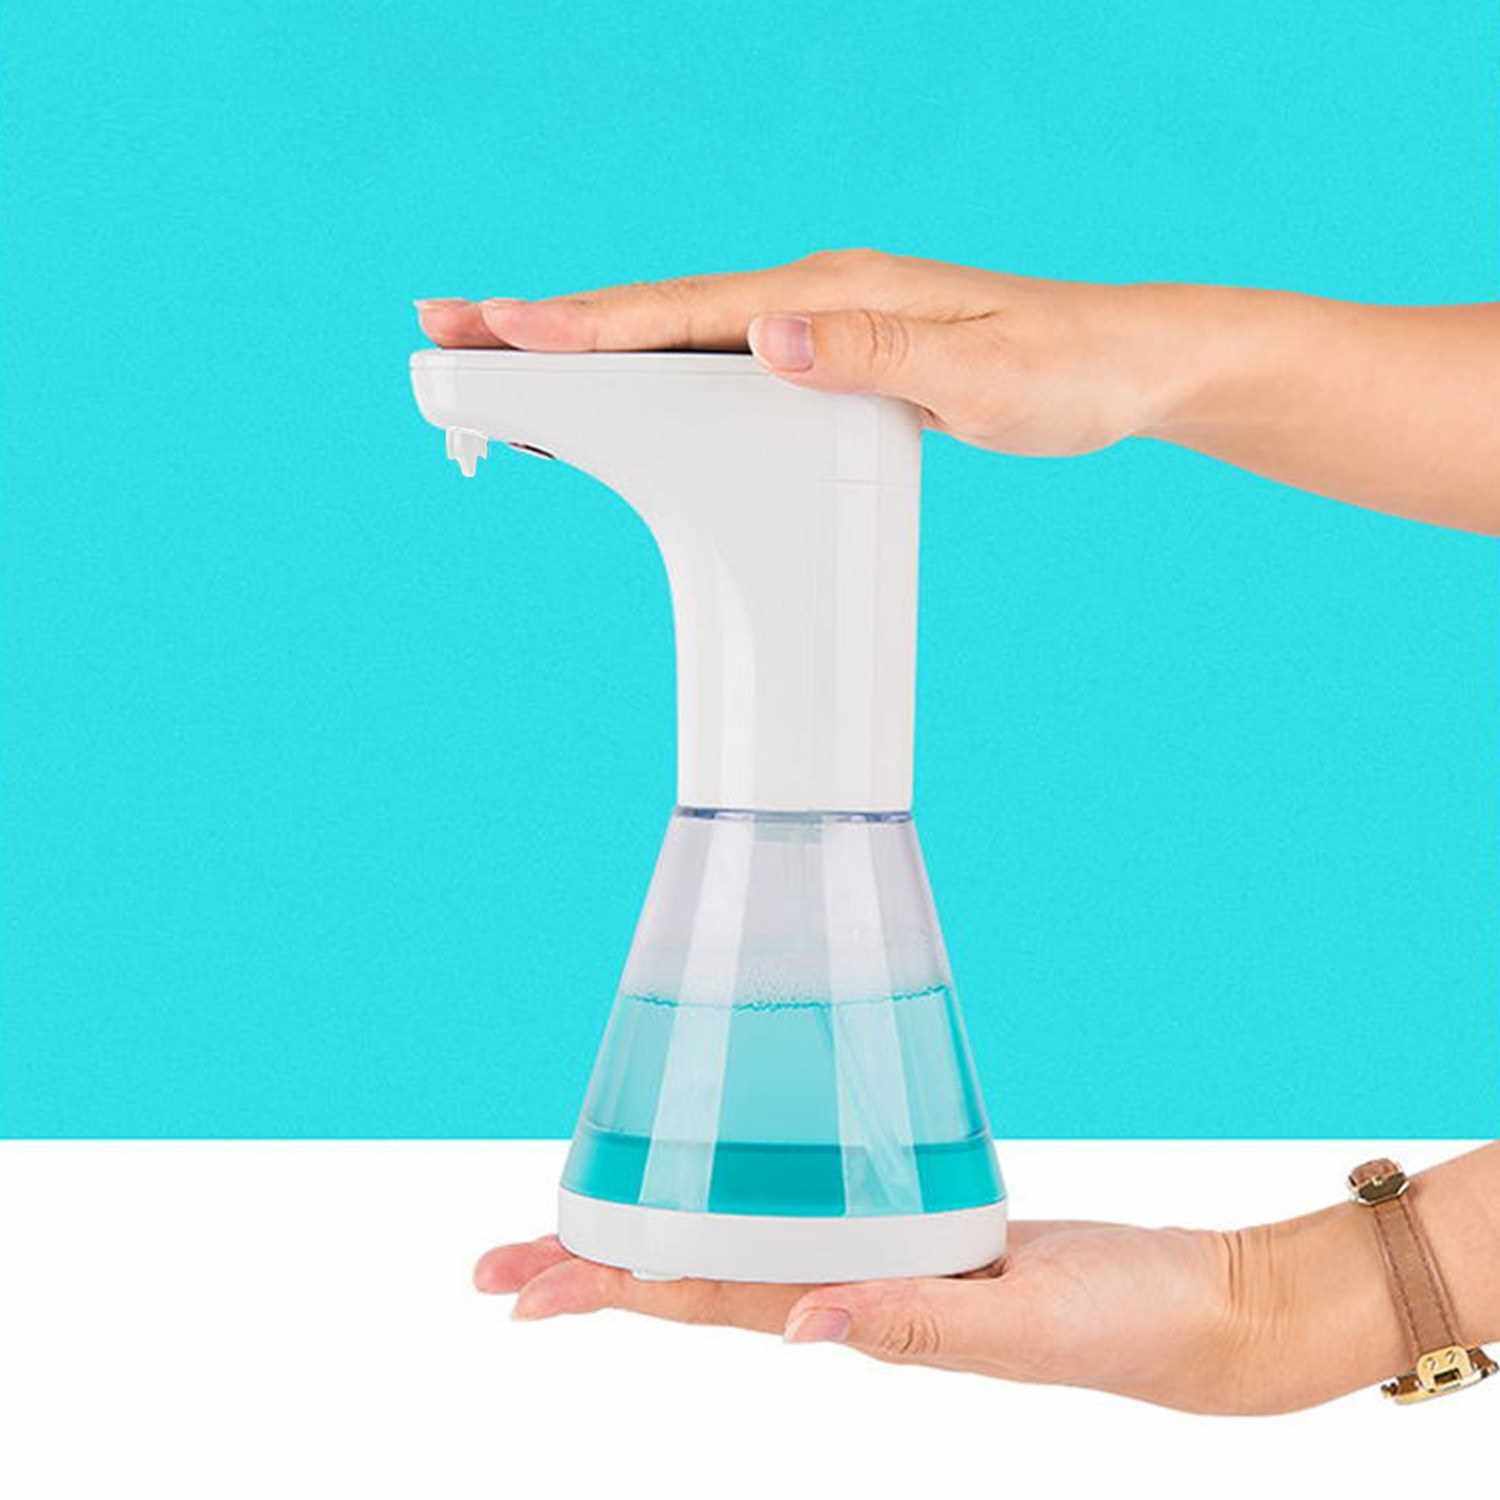 Best Selling 480mL Automatic Soap Dispenser Spray Type Touchless Soap Dispensers with IR Sensor Rinse-free Sanitizer Alcohol Disinfectant Dispenser for Home Commercial Use Hospitals (Standard)